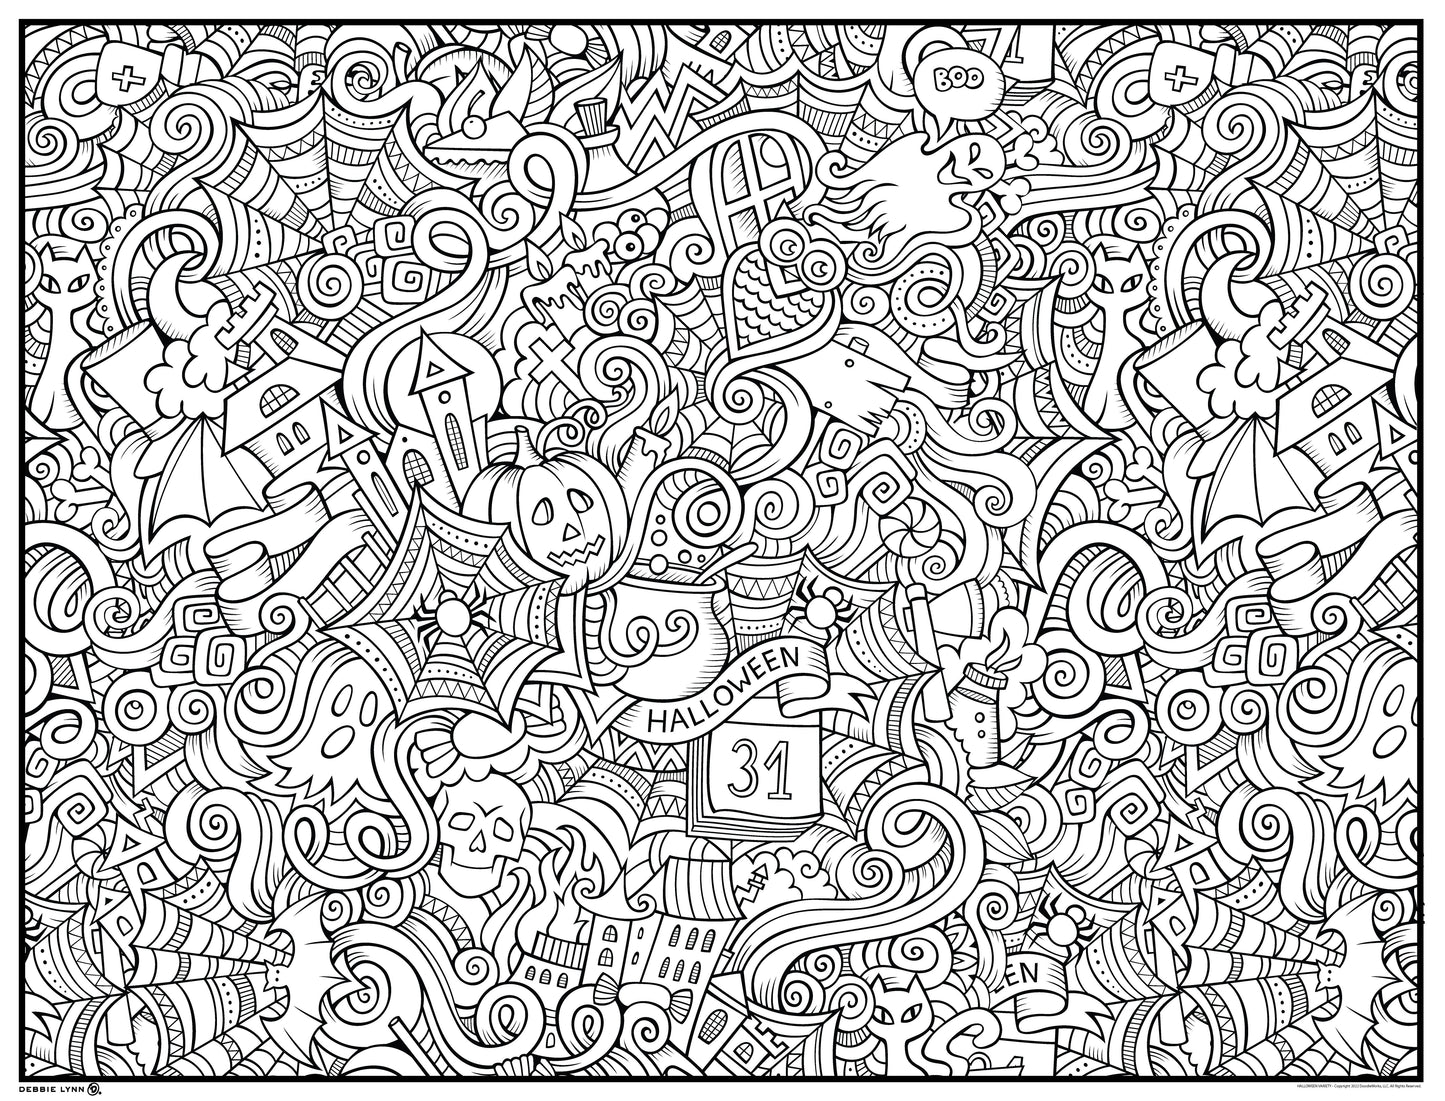 Halloween Variety Personalized Giant Coloring Poster 46"x60"